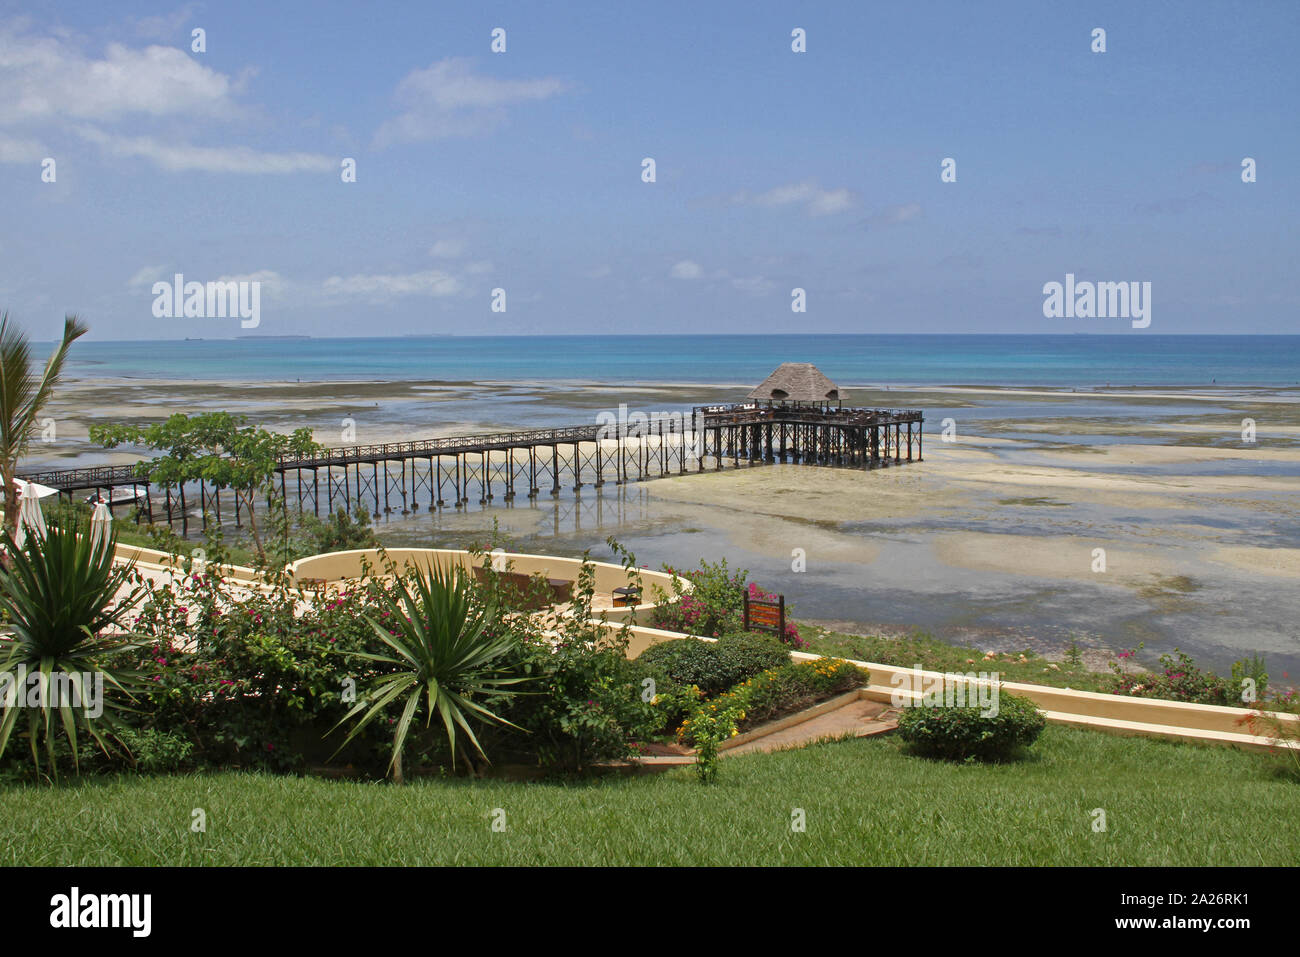 View of pier with a Lapa bar on beach and flowerbed with lawn, off the coast of Zanzibar, Unguja Island, Tanzania. Stock Photo